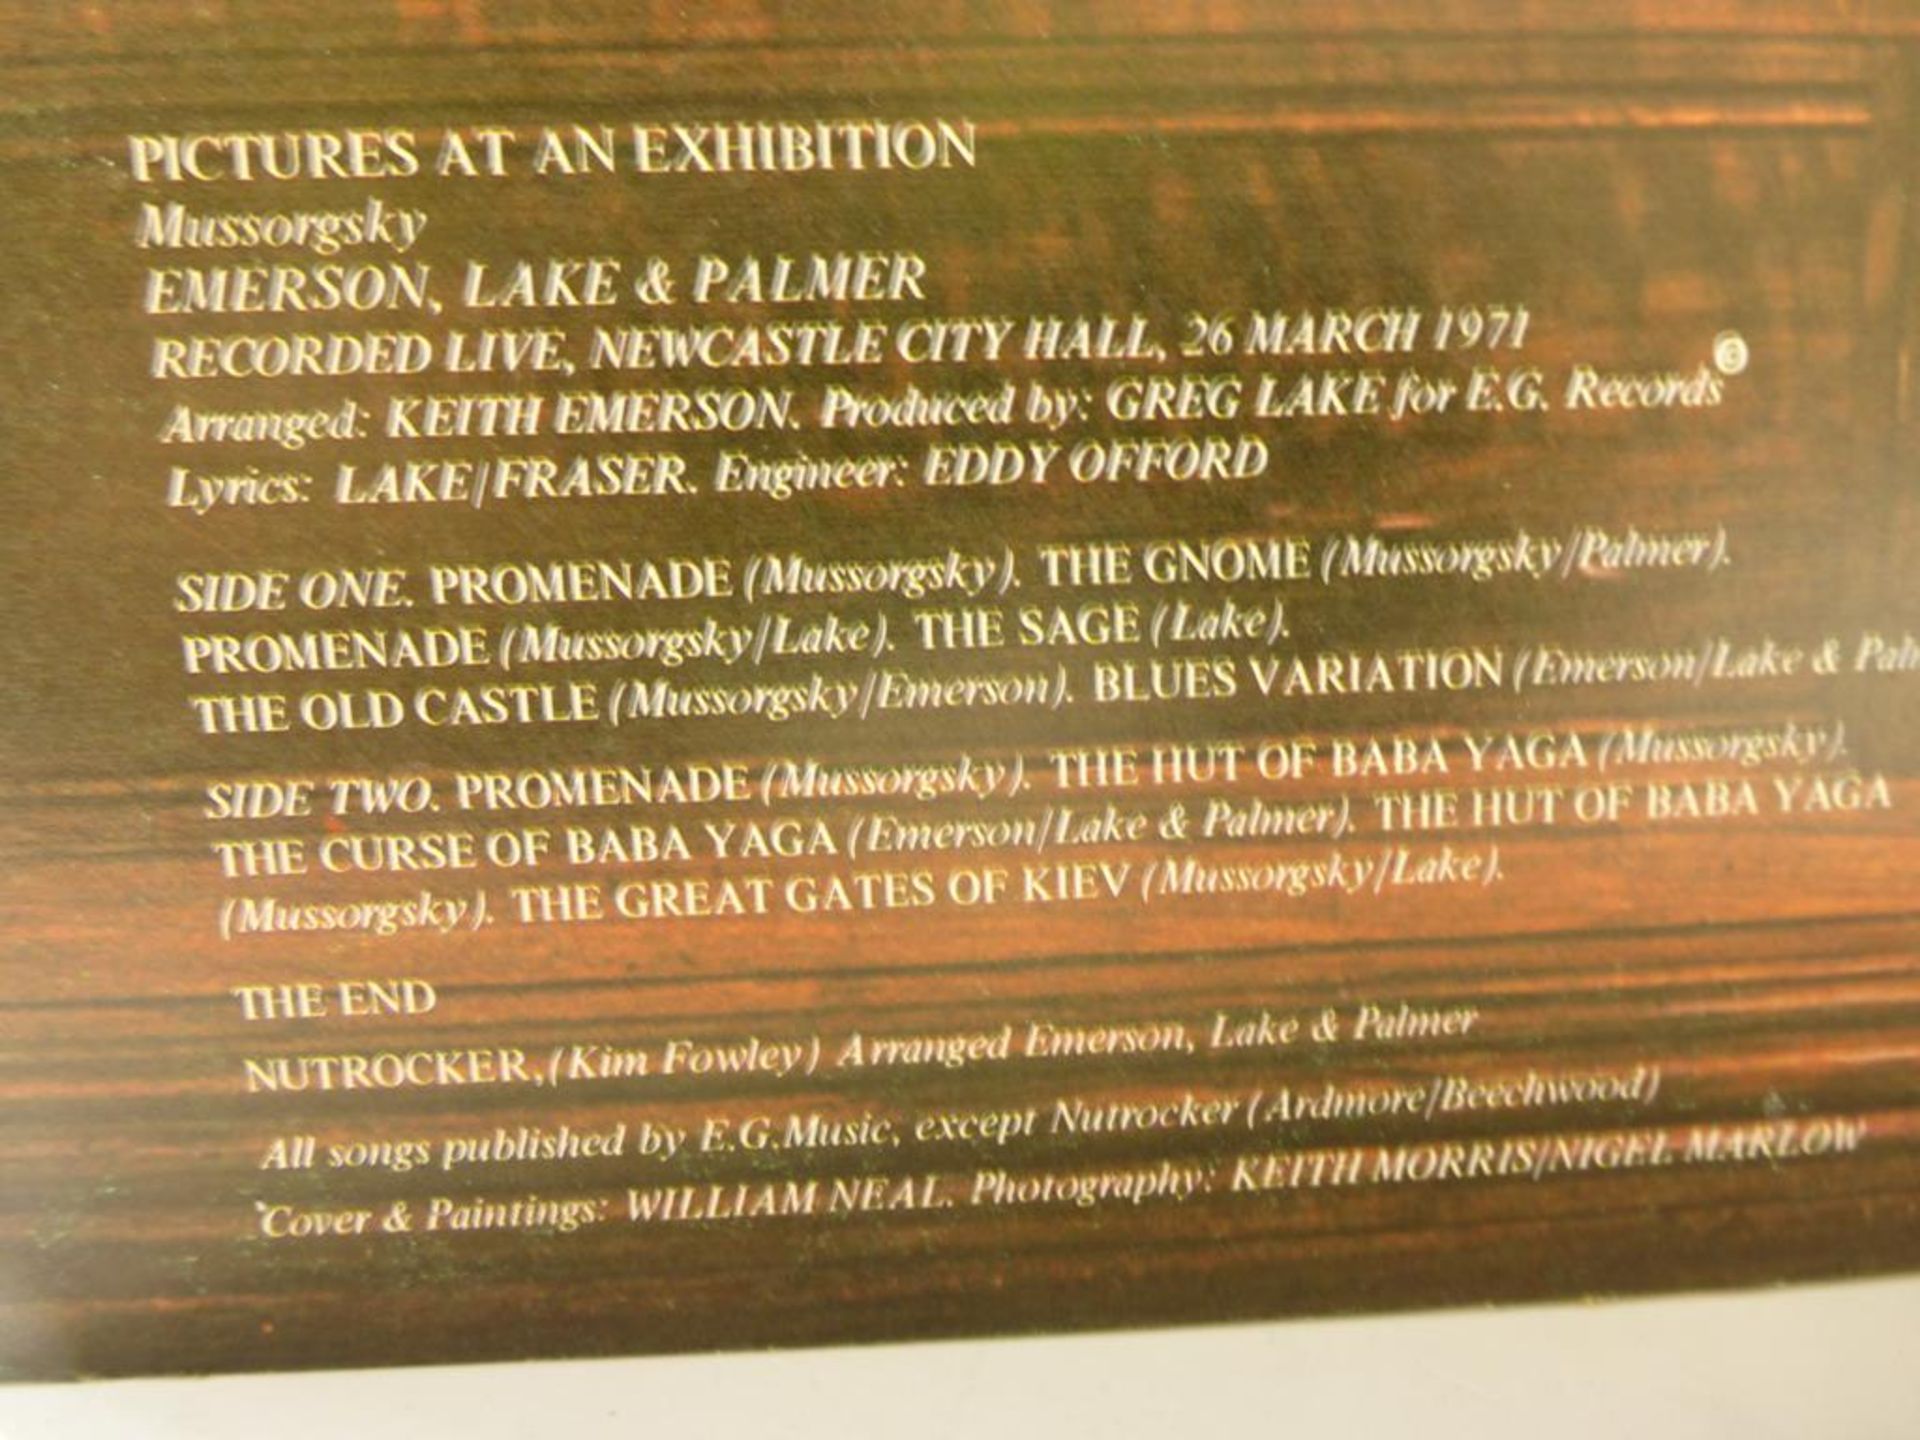 Emerson Lake & Palmer "Pictures at an Exhibition" - Image 4 of 6